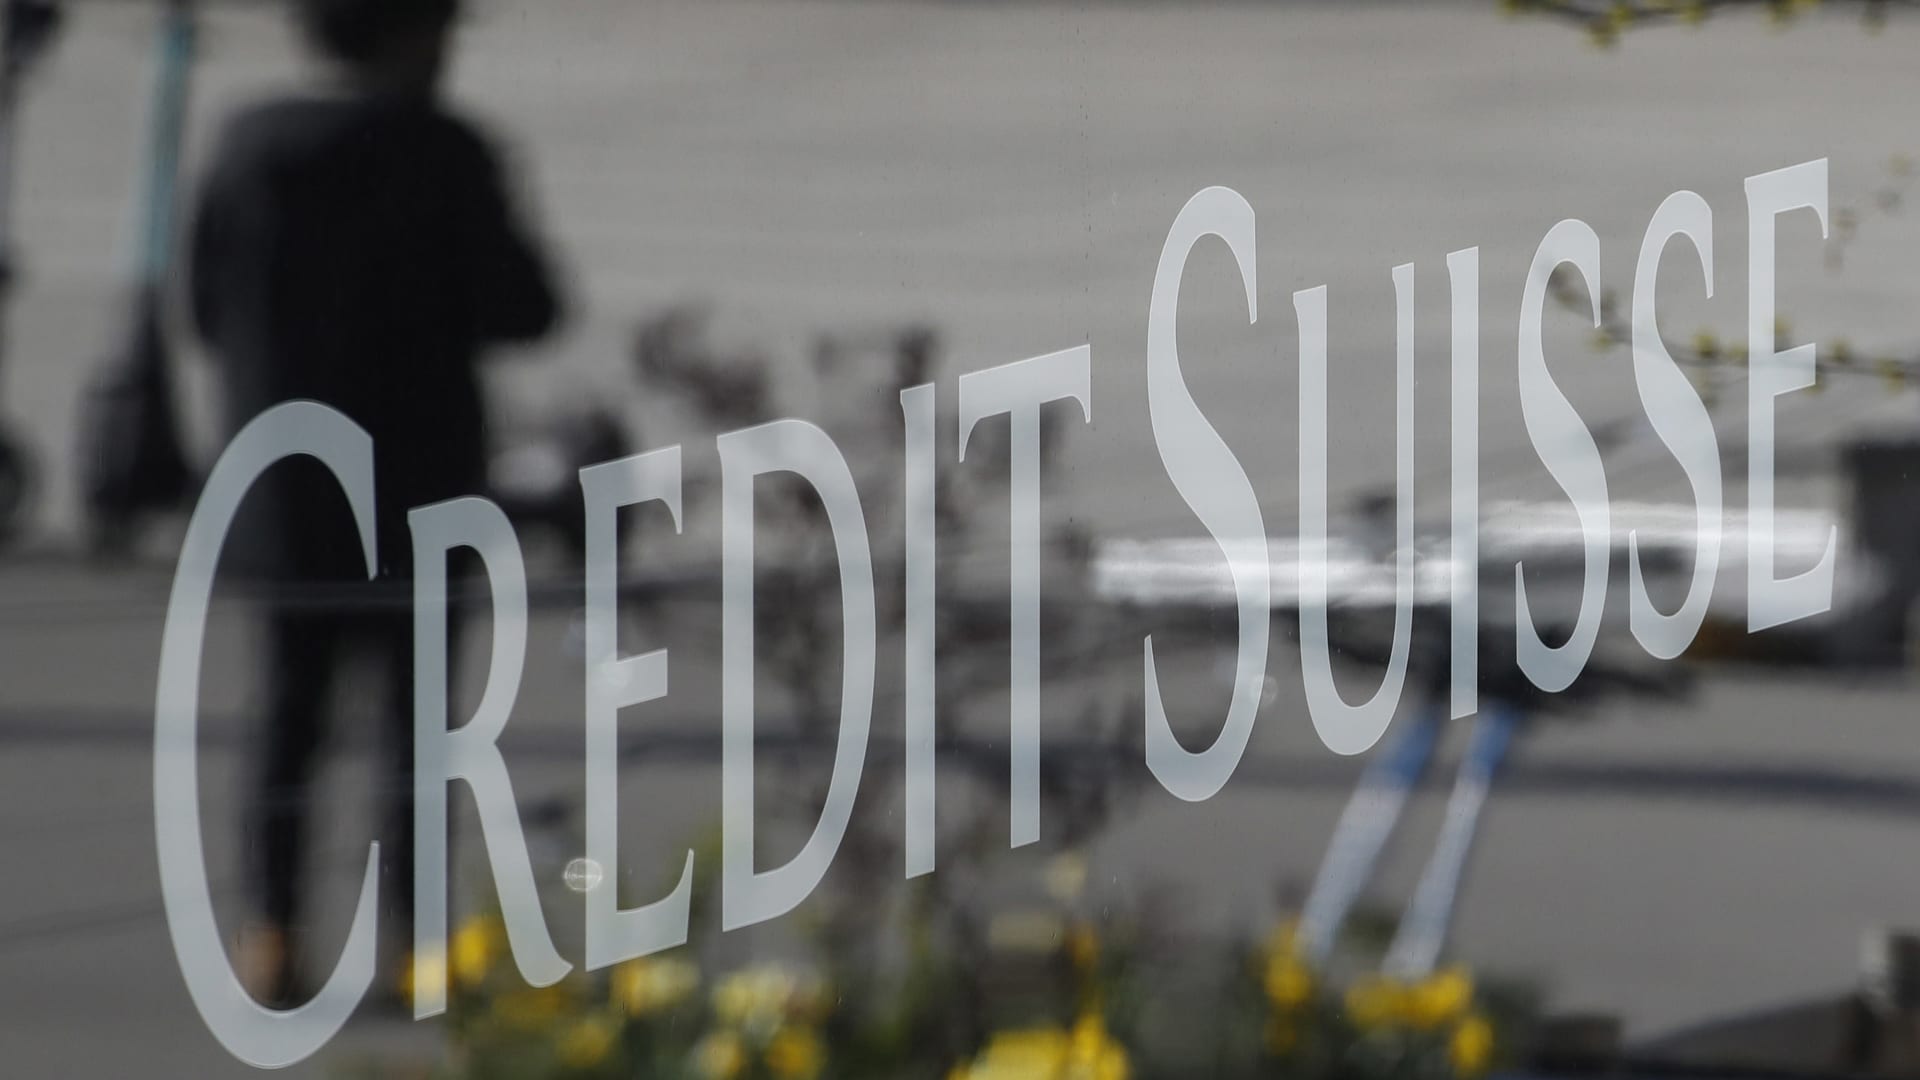 A Credit Suisse logo in the window of a Credit Suisse Group AG bank branch in Zurich, Switzerland, on Thursday, April 8, 2021.